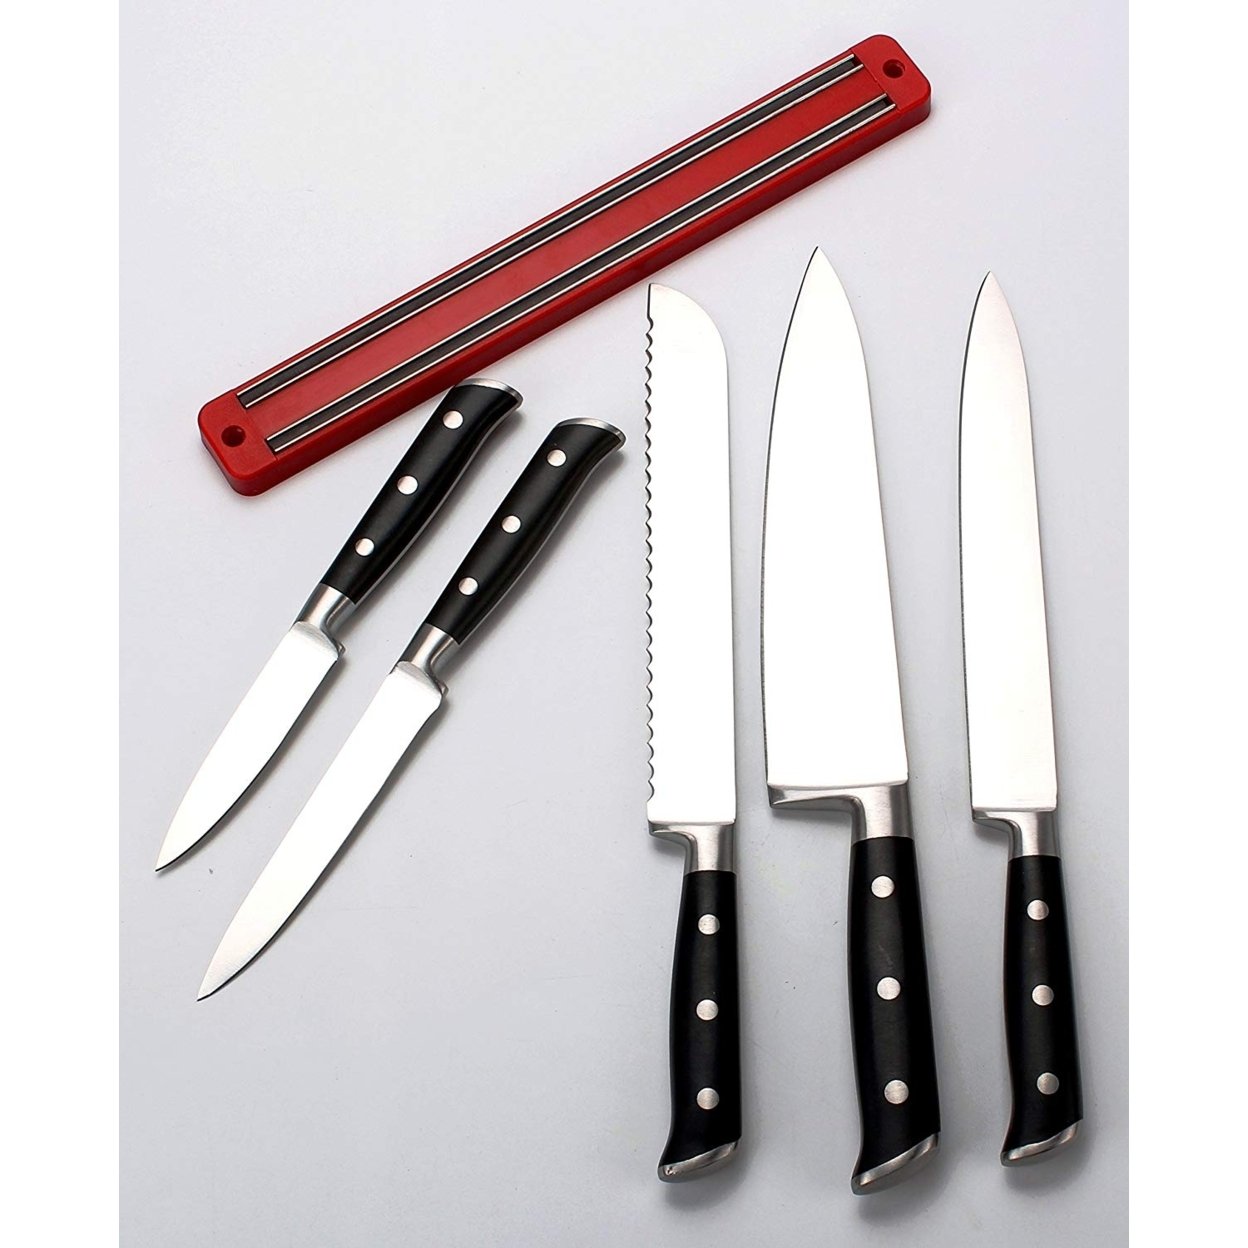 Magnetic Knife/Tool Rack - 4 Red